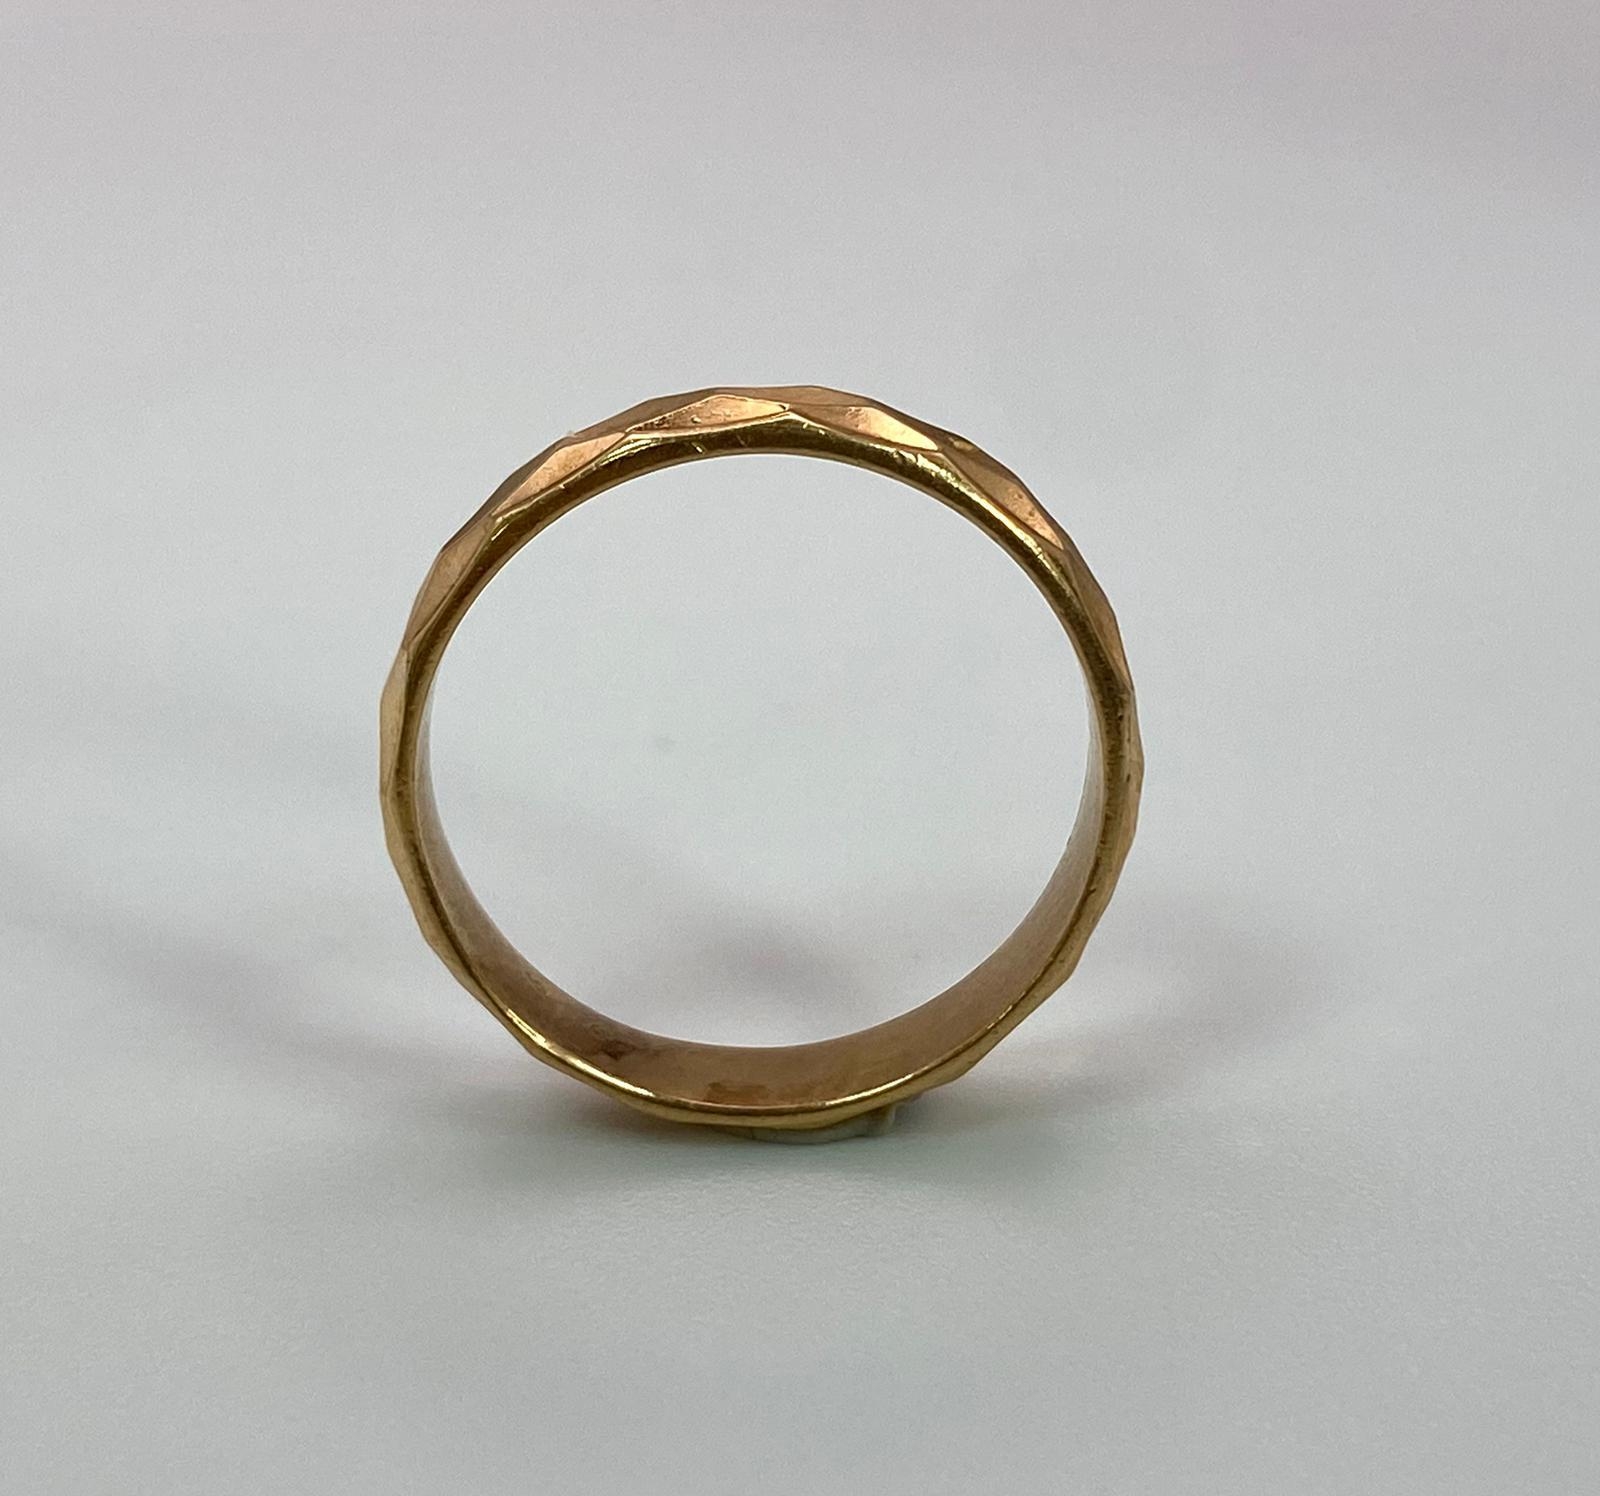 A 9K Yellow Gold Faceted Band Ring. Size M. 2.9g weight. - Image 3 of 4